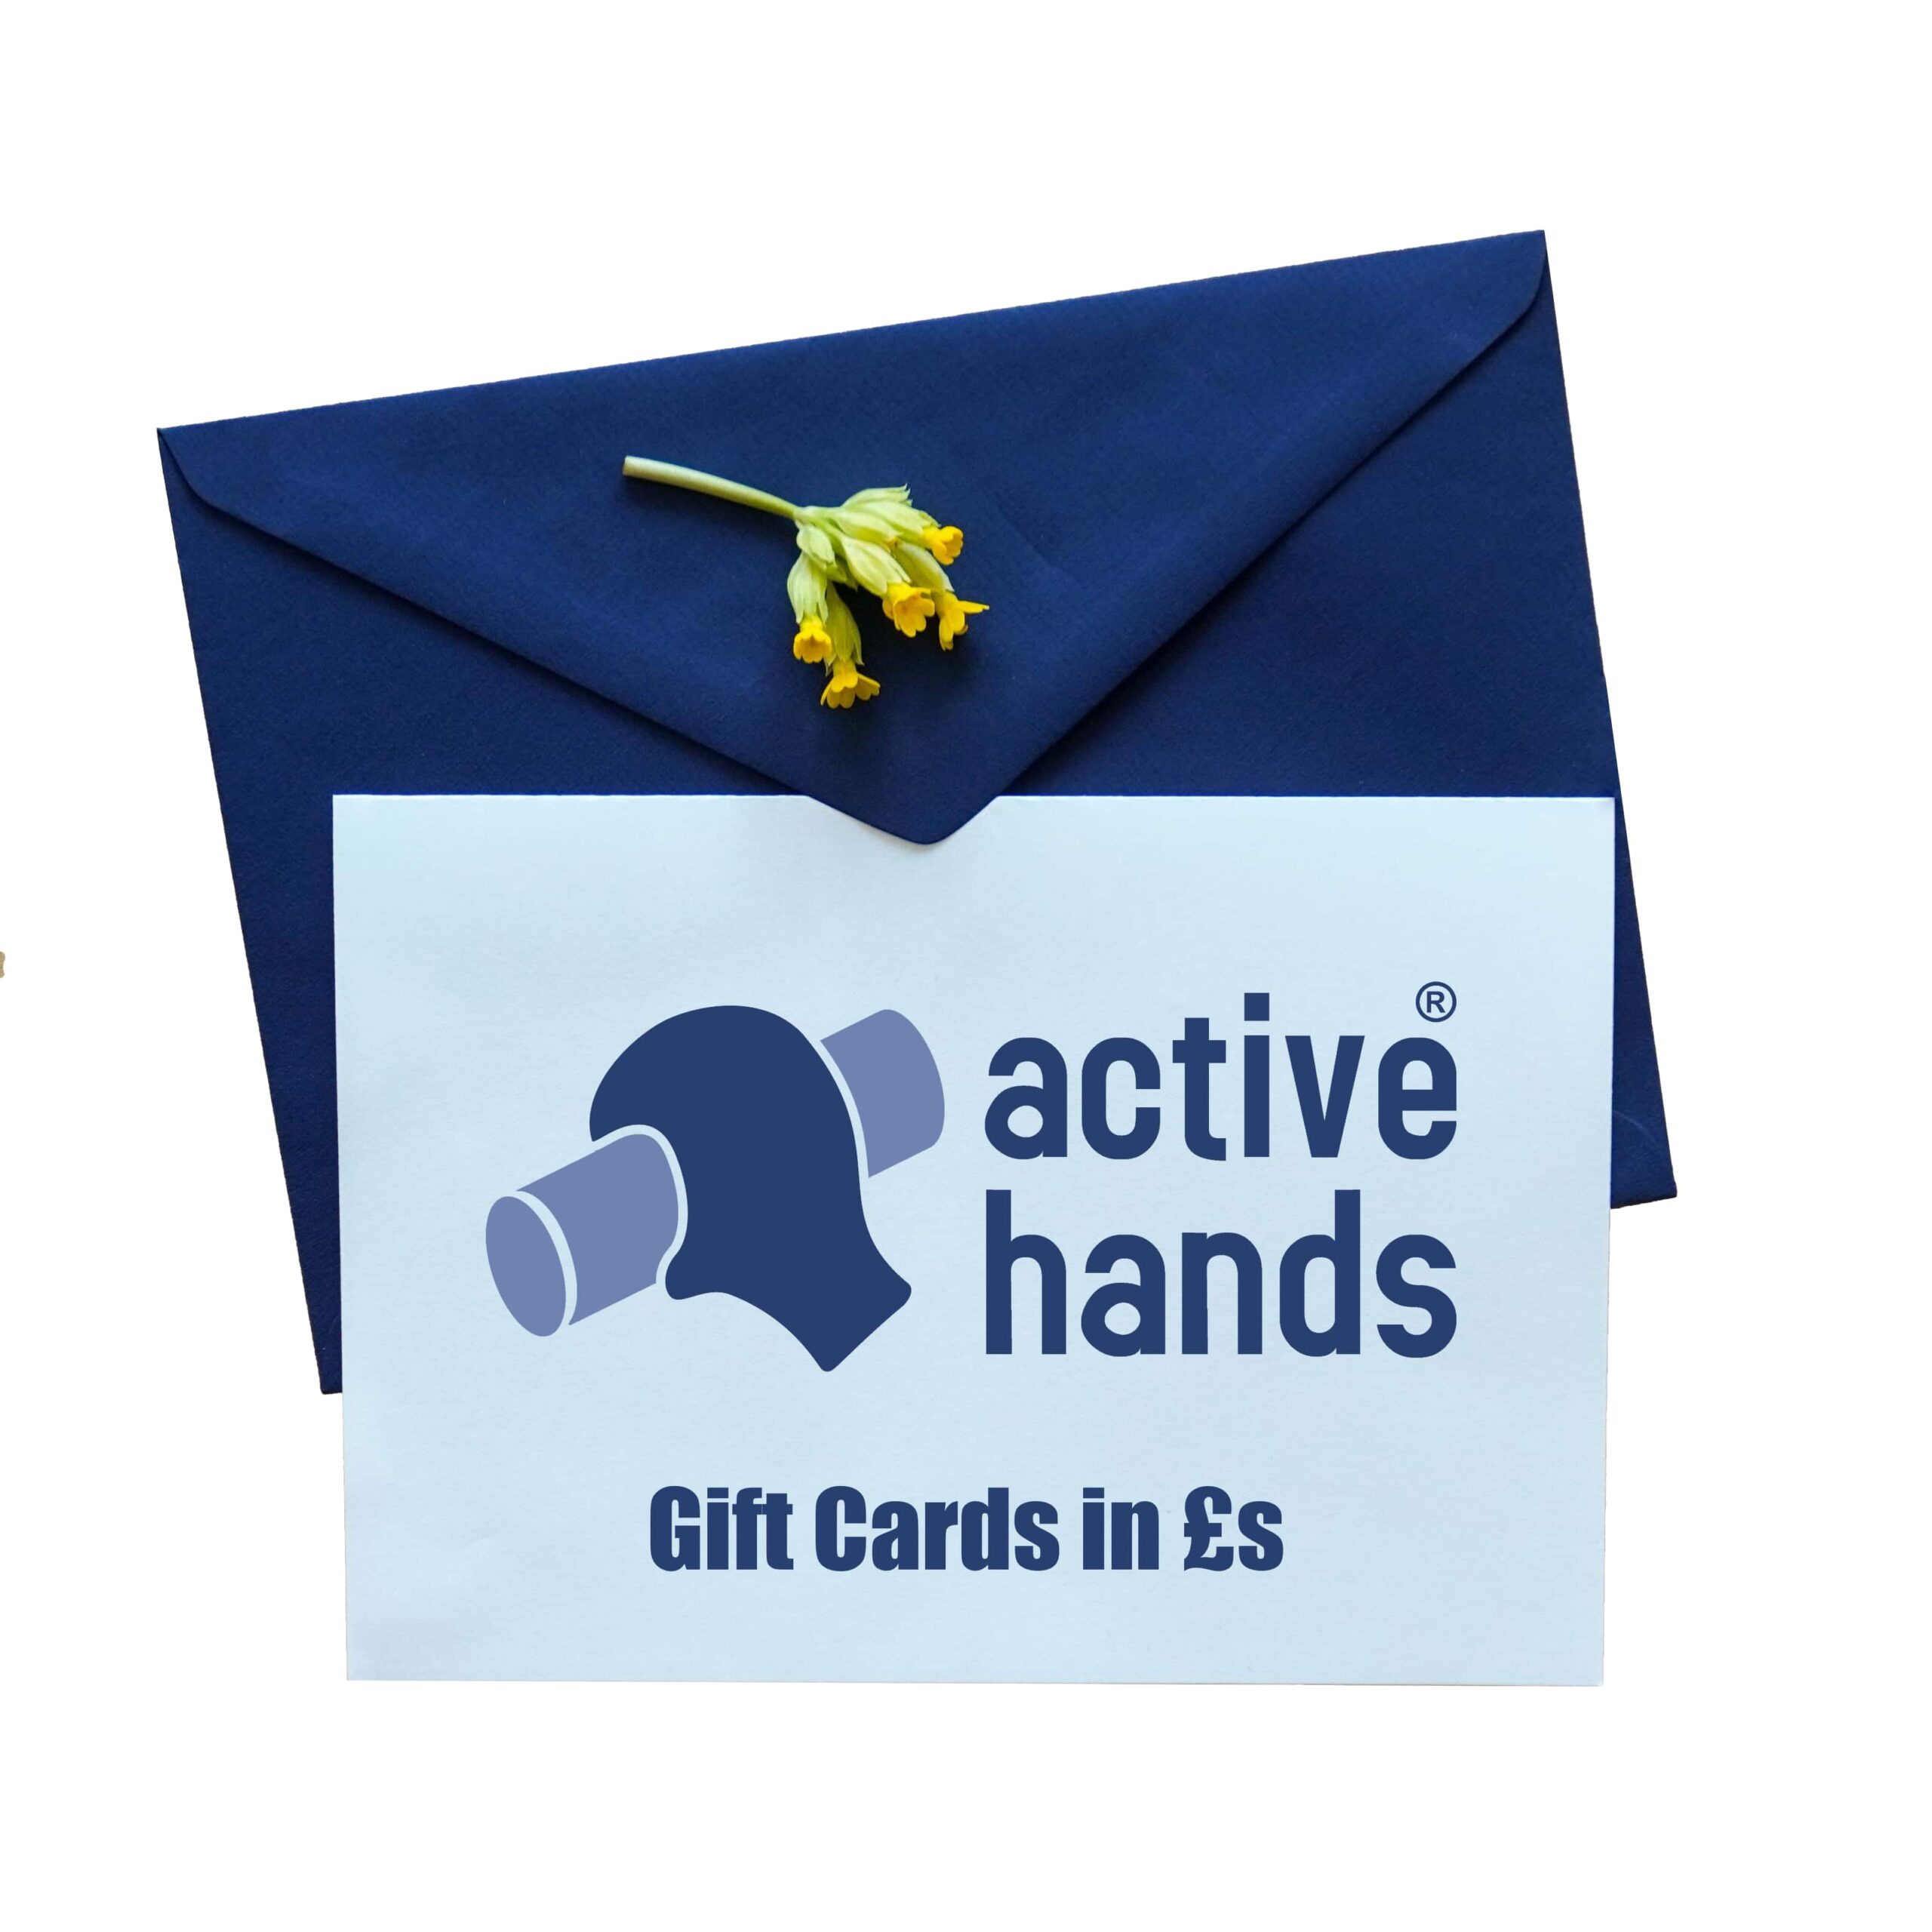 Gift cards in £s